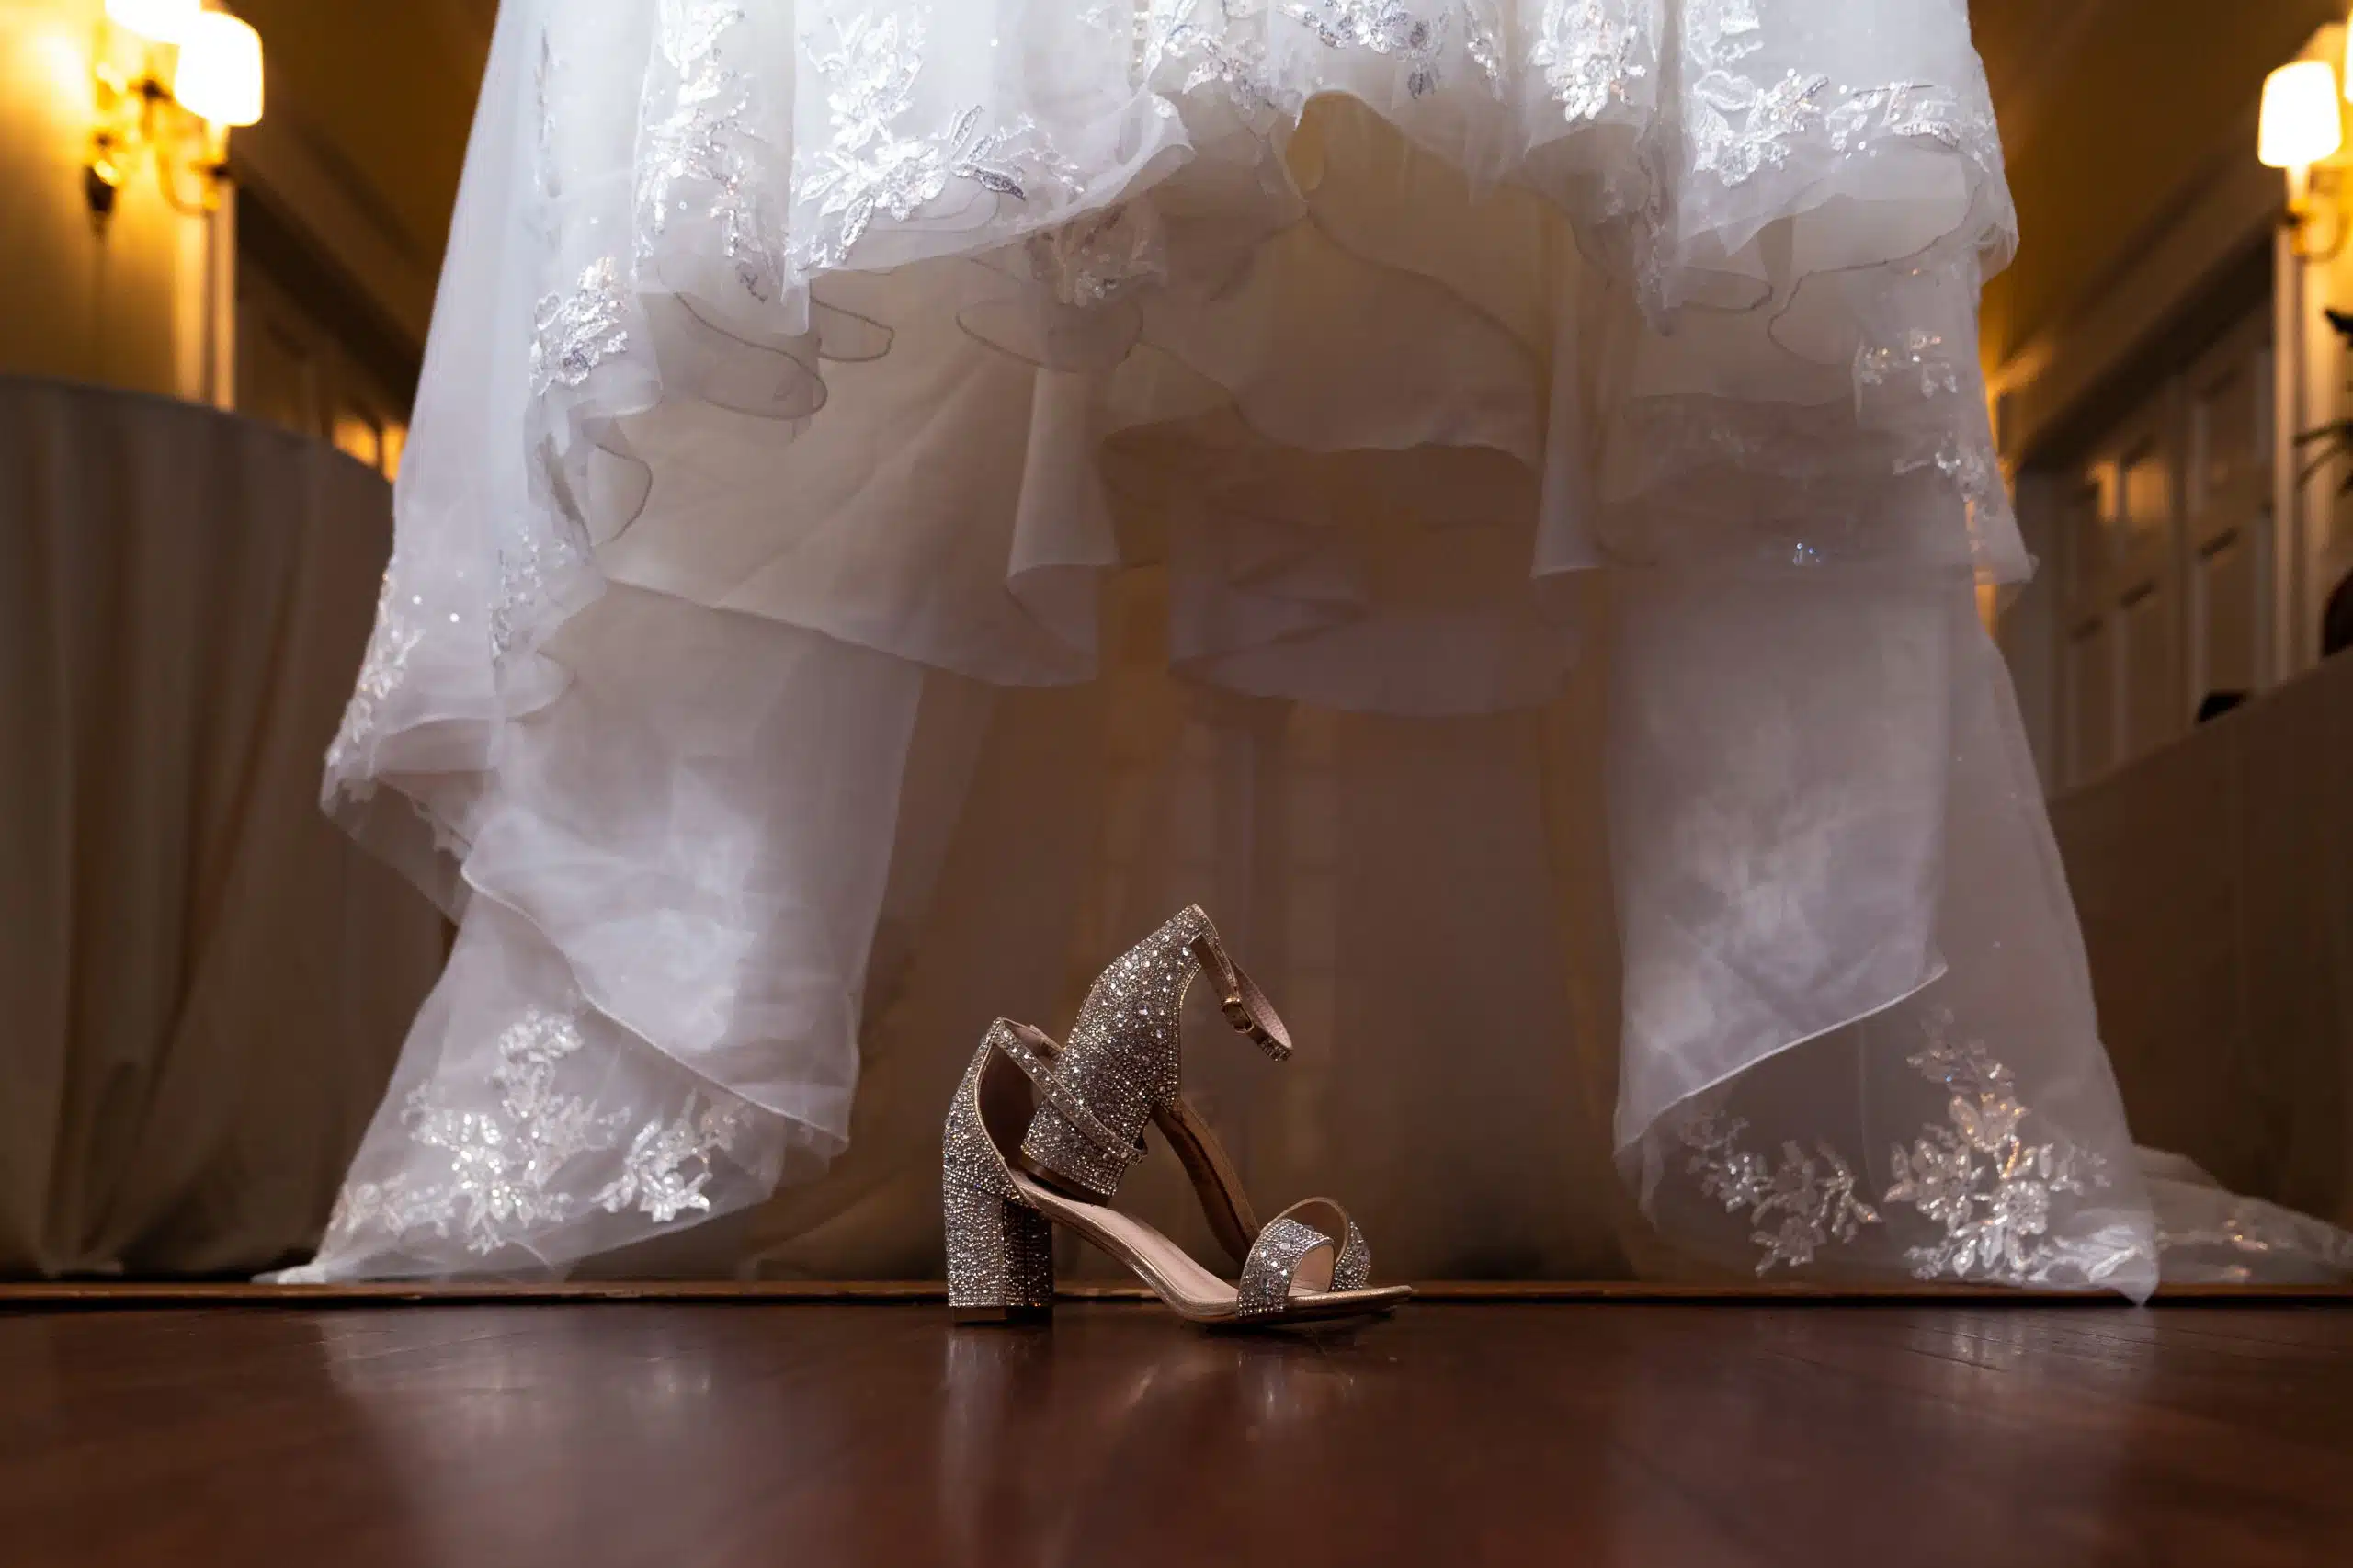 The bride's first wedding dress and shoes. The dress is hanging up at the front of Rock Springs Wedding Venue located in Greenville, NC.